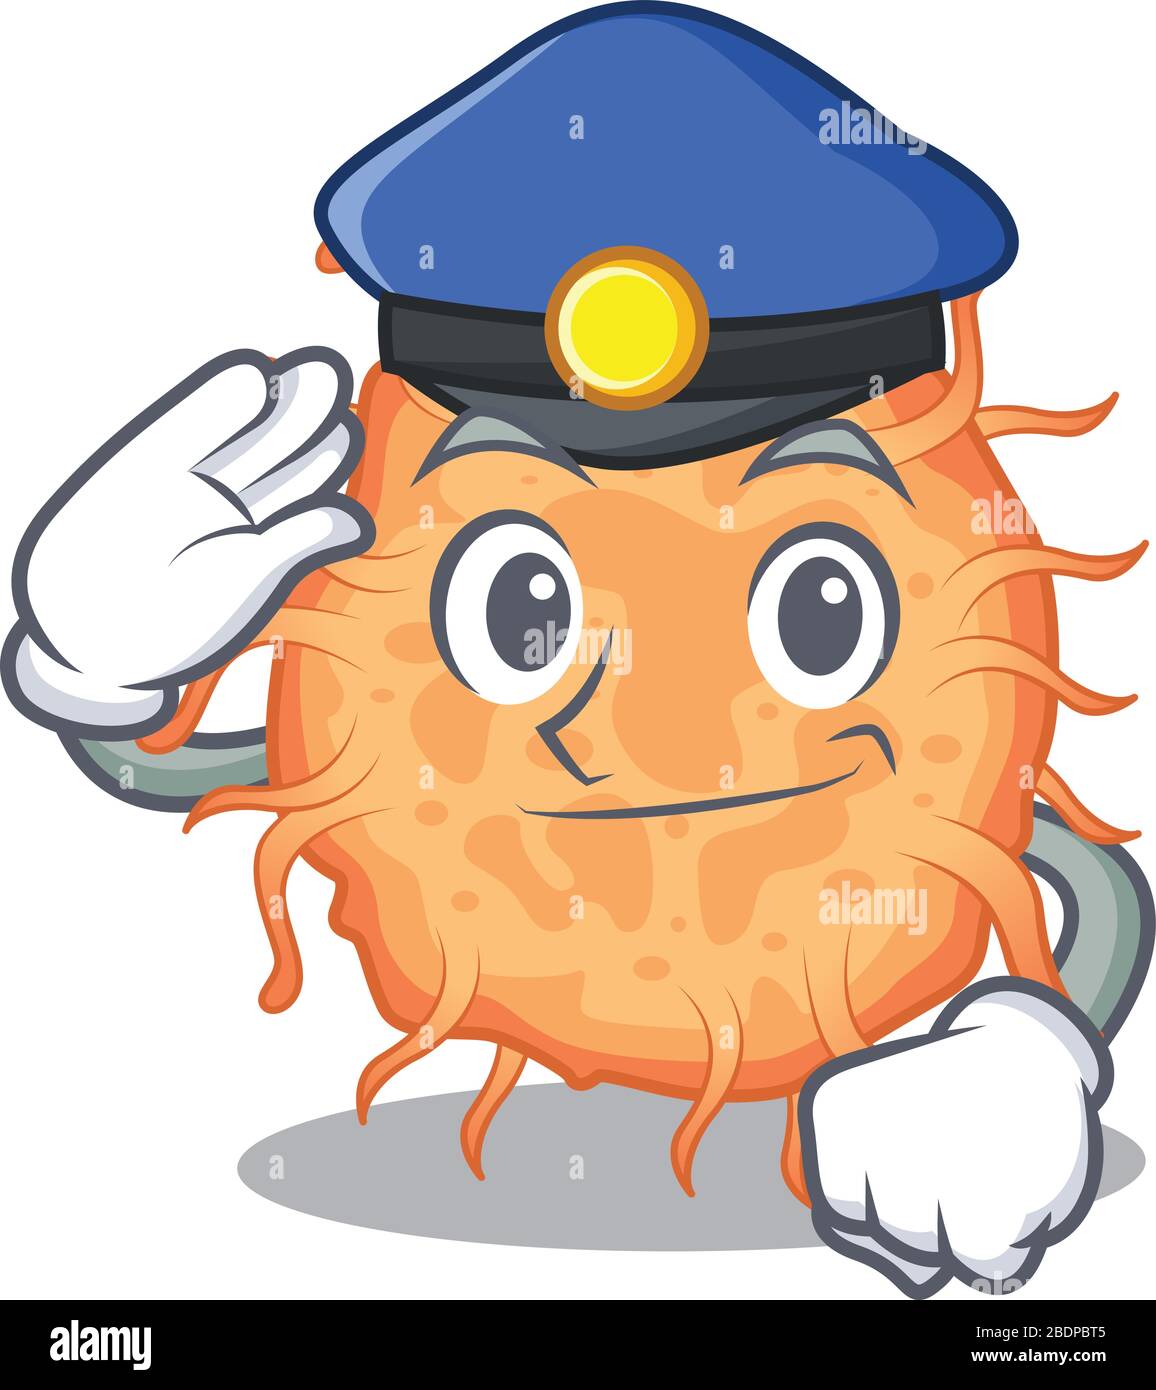 Police officer mascot design of bacteria endospore wearing a hat Stock Vector